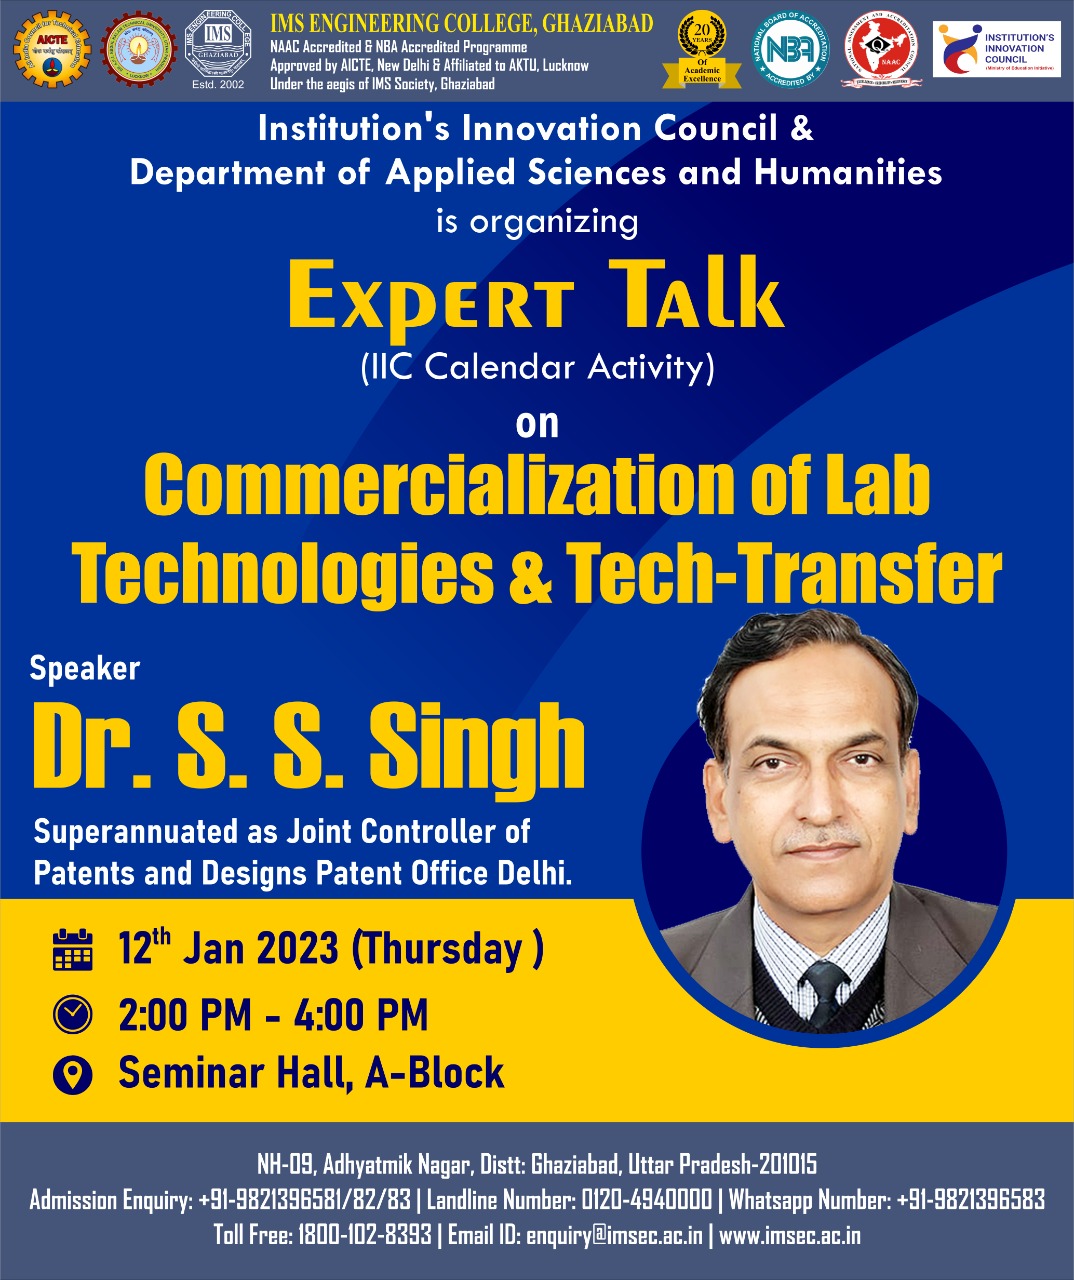 Expert talk on the theme of Commercialization of Lab Technologies & Tech-Transfer